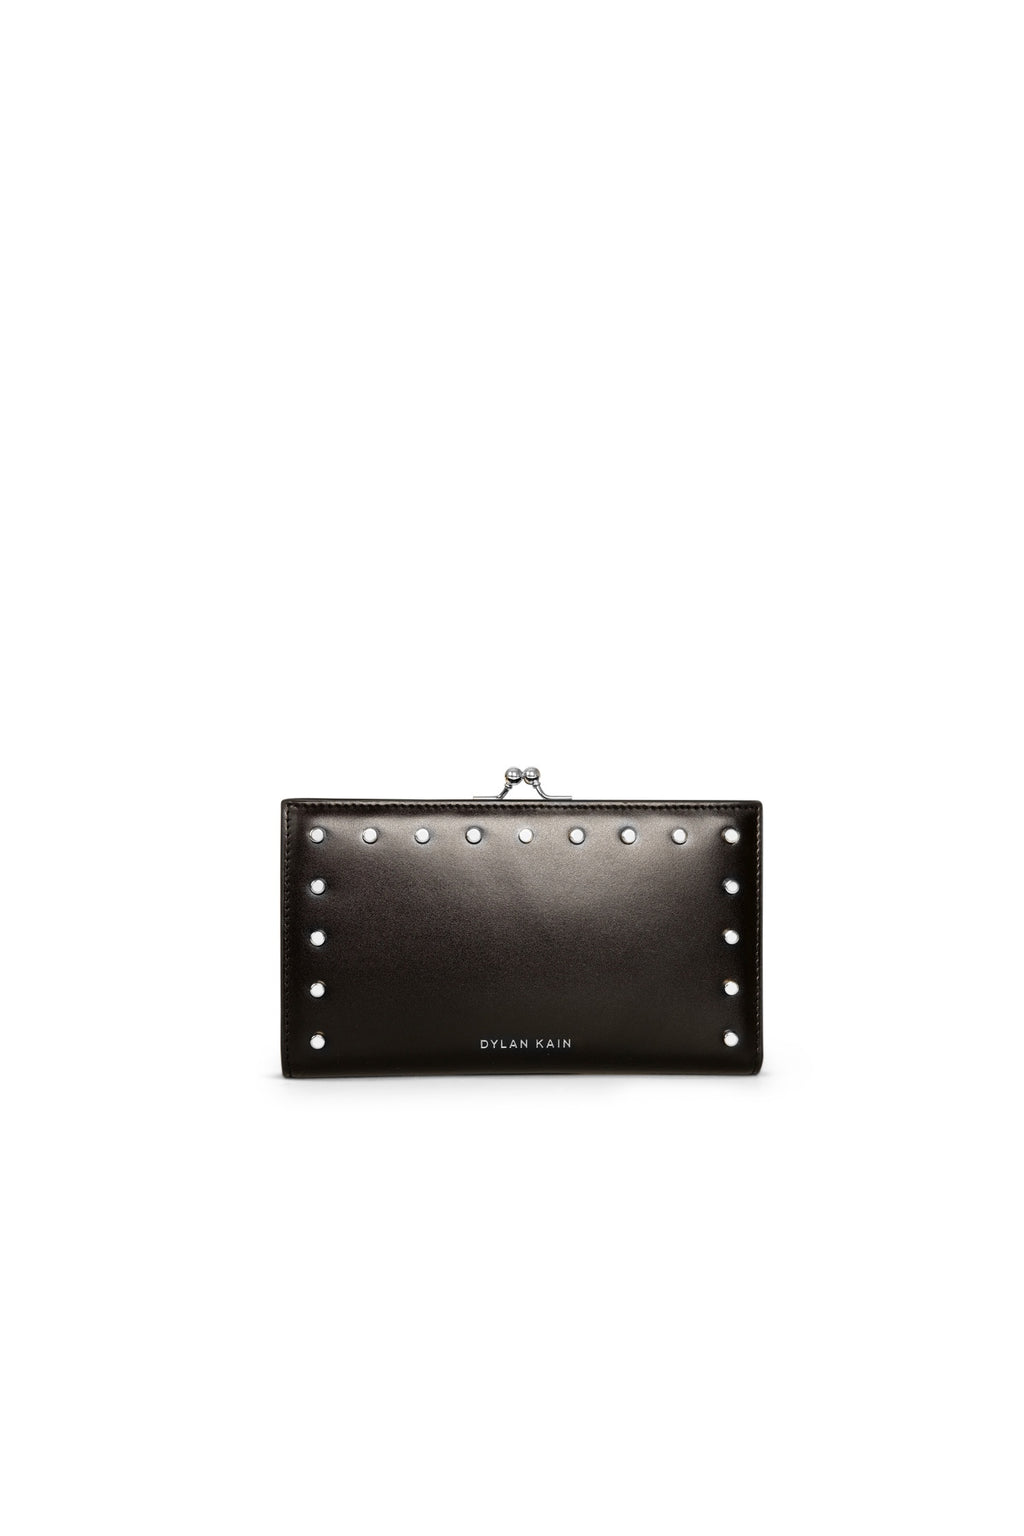 DYLAIN KAIN - THE LARGE FOREVER LOVE STUDDED WALLET SILVER